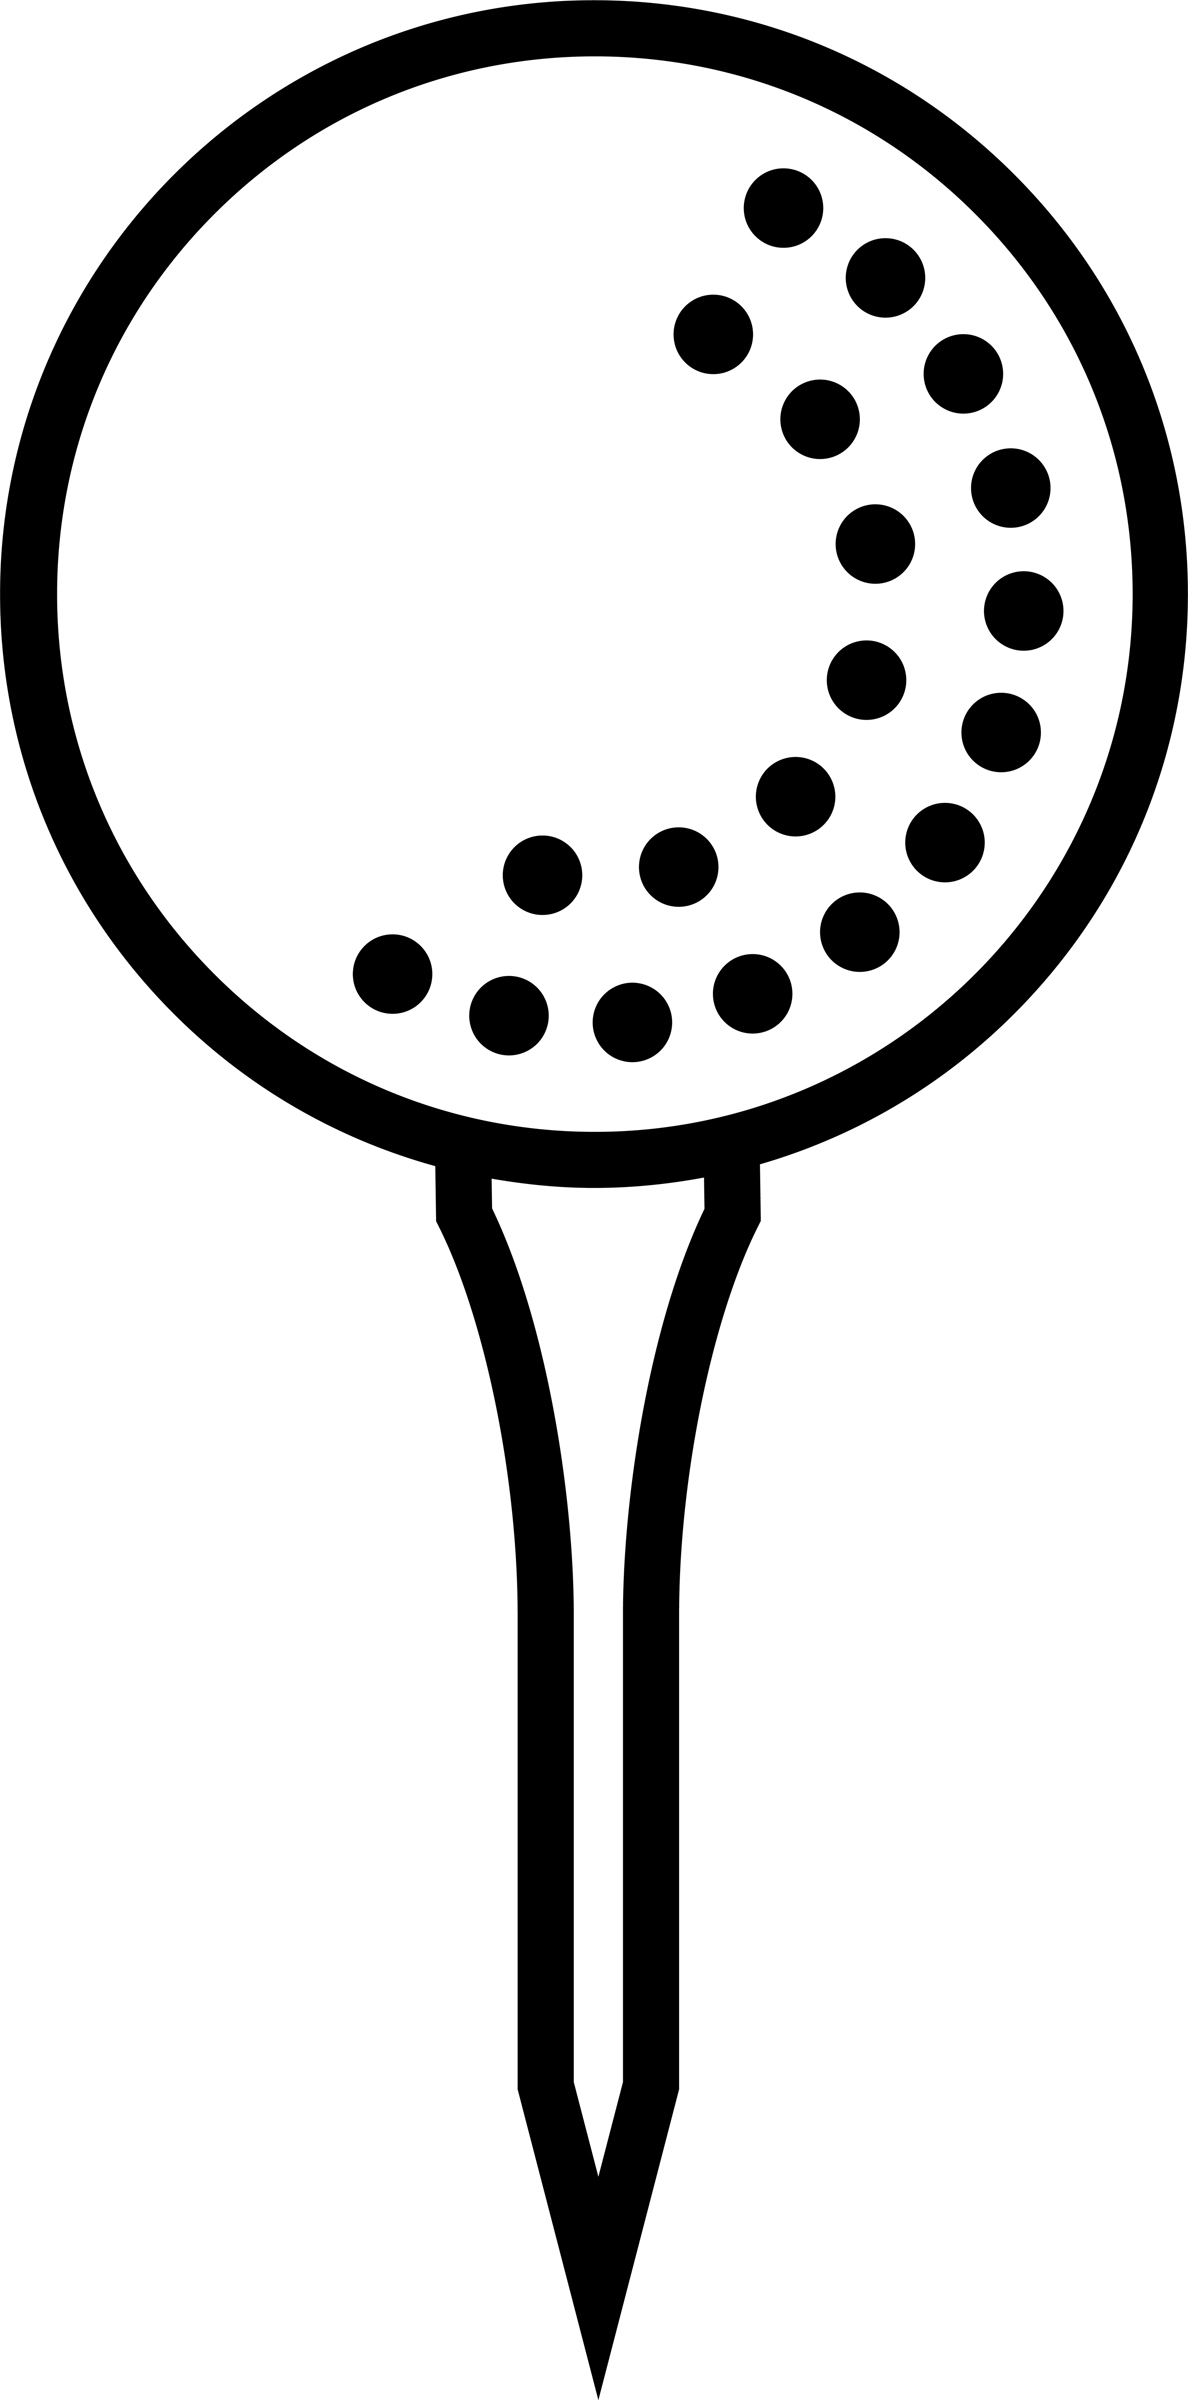 Golf Clubs Crossed With Ball Golf ball on tee clip art | Babaimage